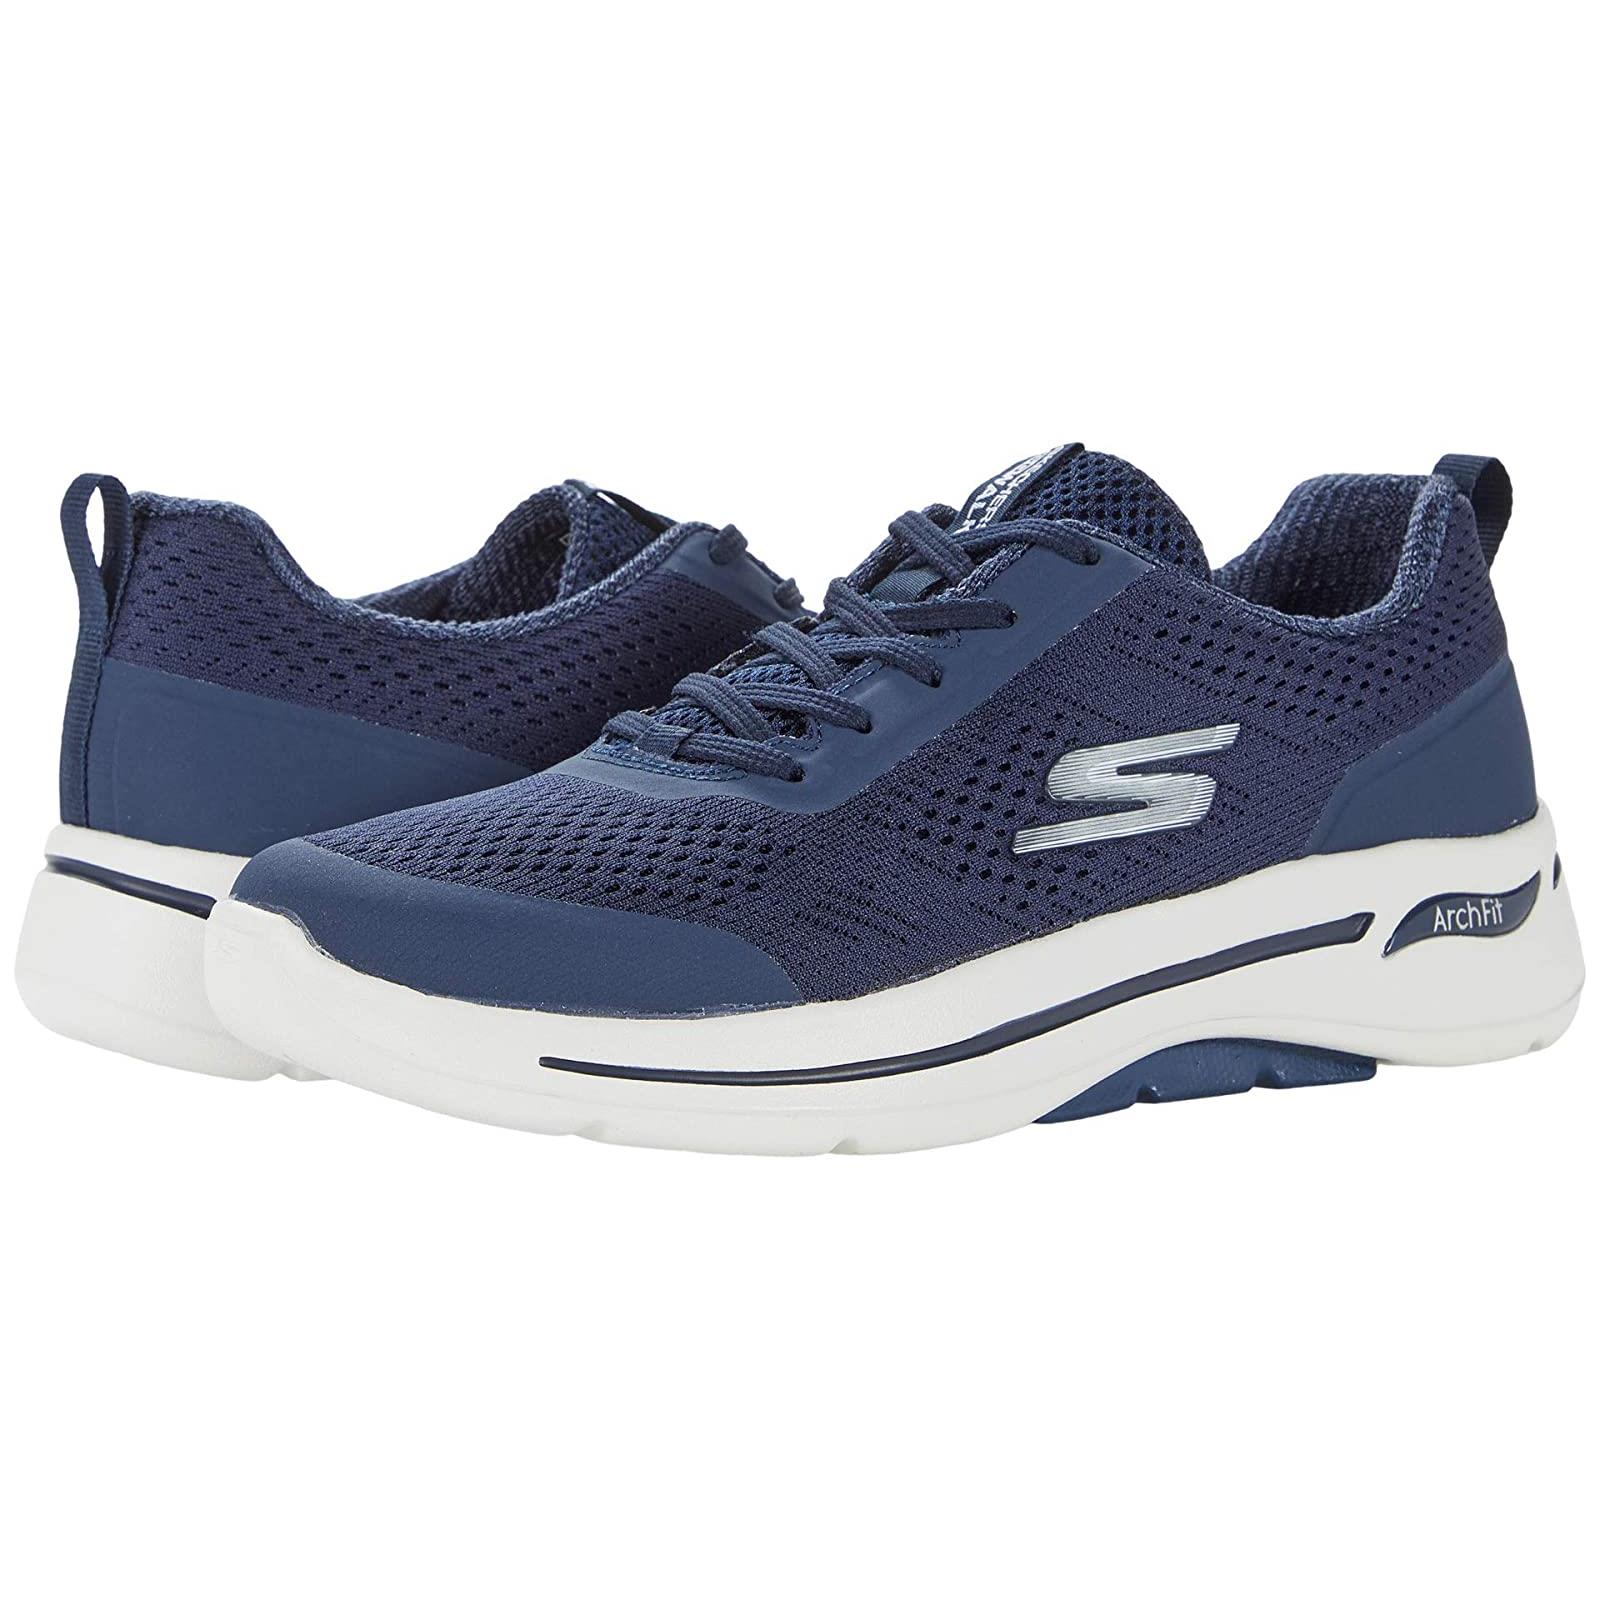 Woman`s Shoes Skechers Performance Go Walk Arch Fit - 124404 Navy